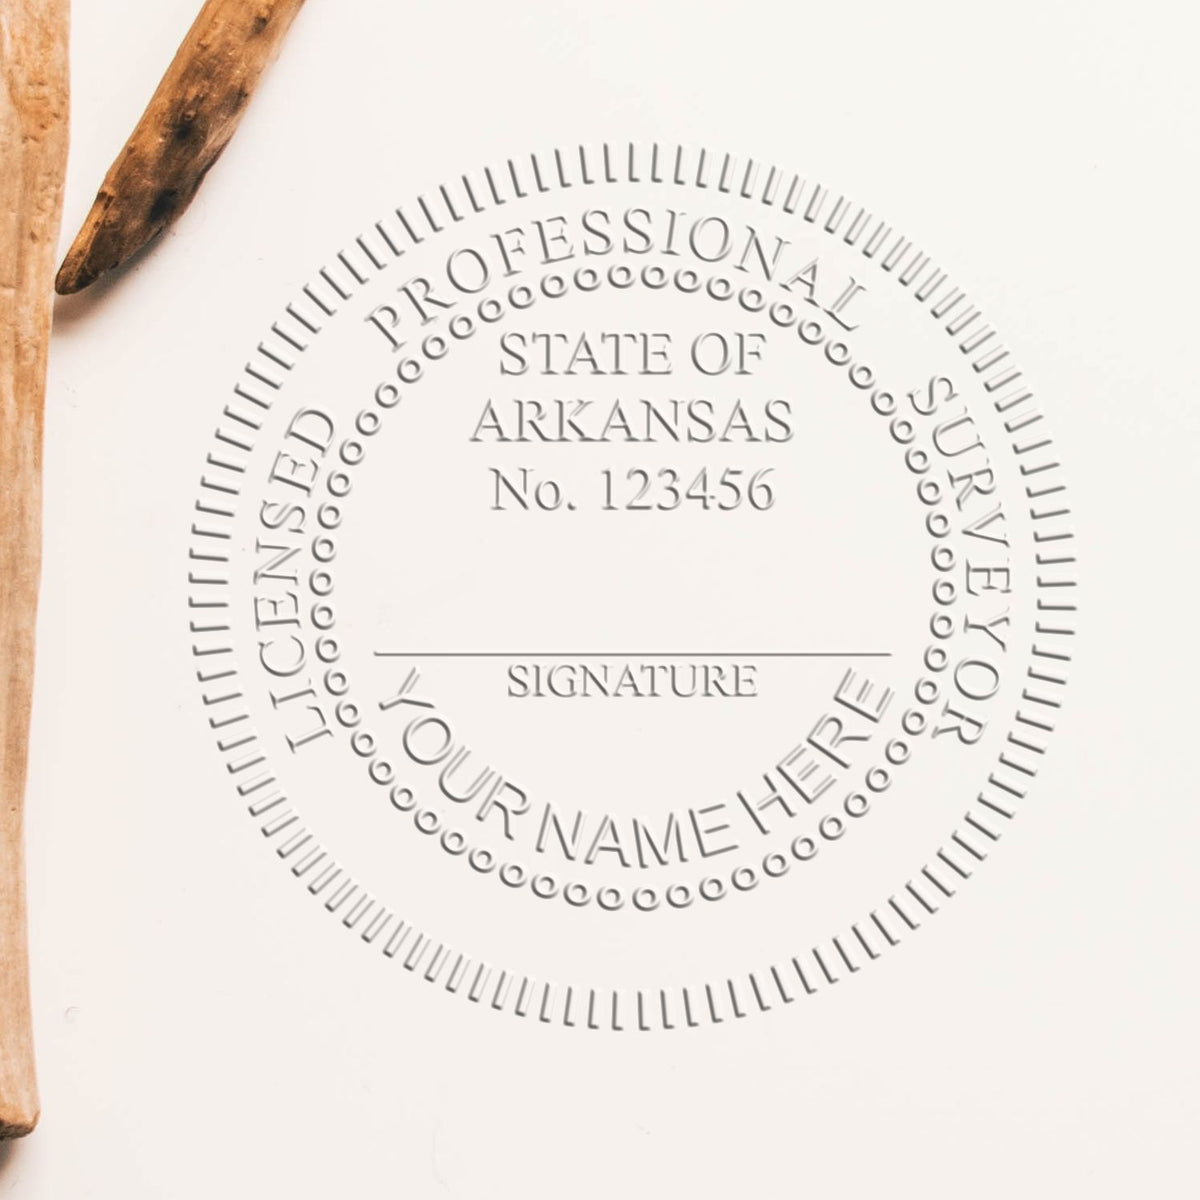 Another Example of a stamped impression of the Heavy Duty Cast Iron Arkansas Land Surveyor Seal Embosser on a piece of office paper.